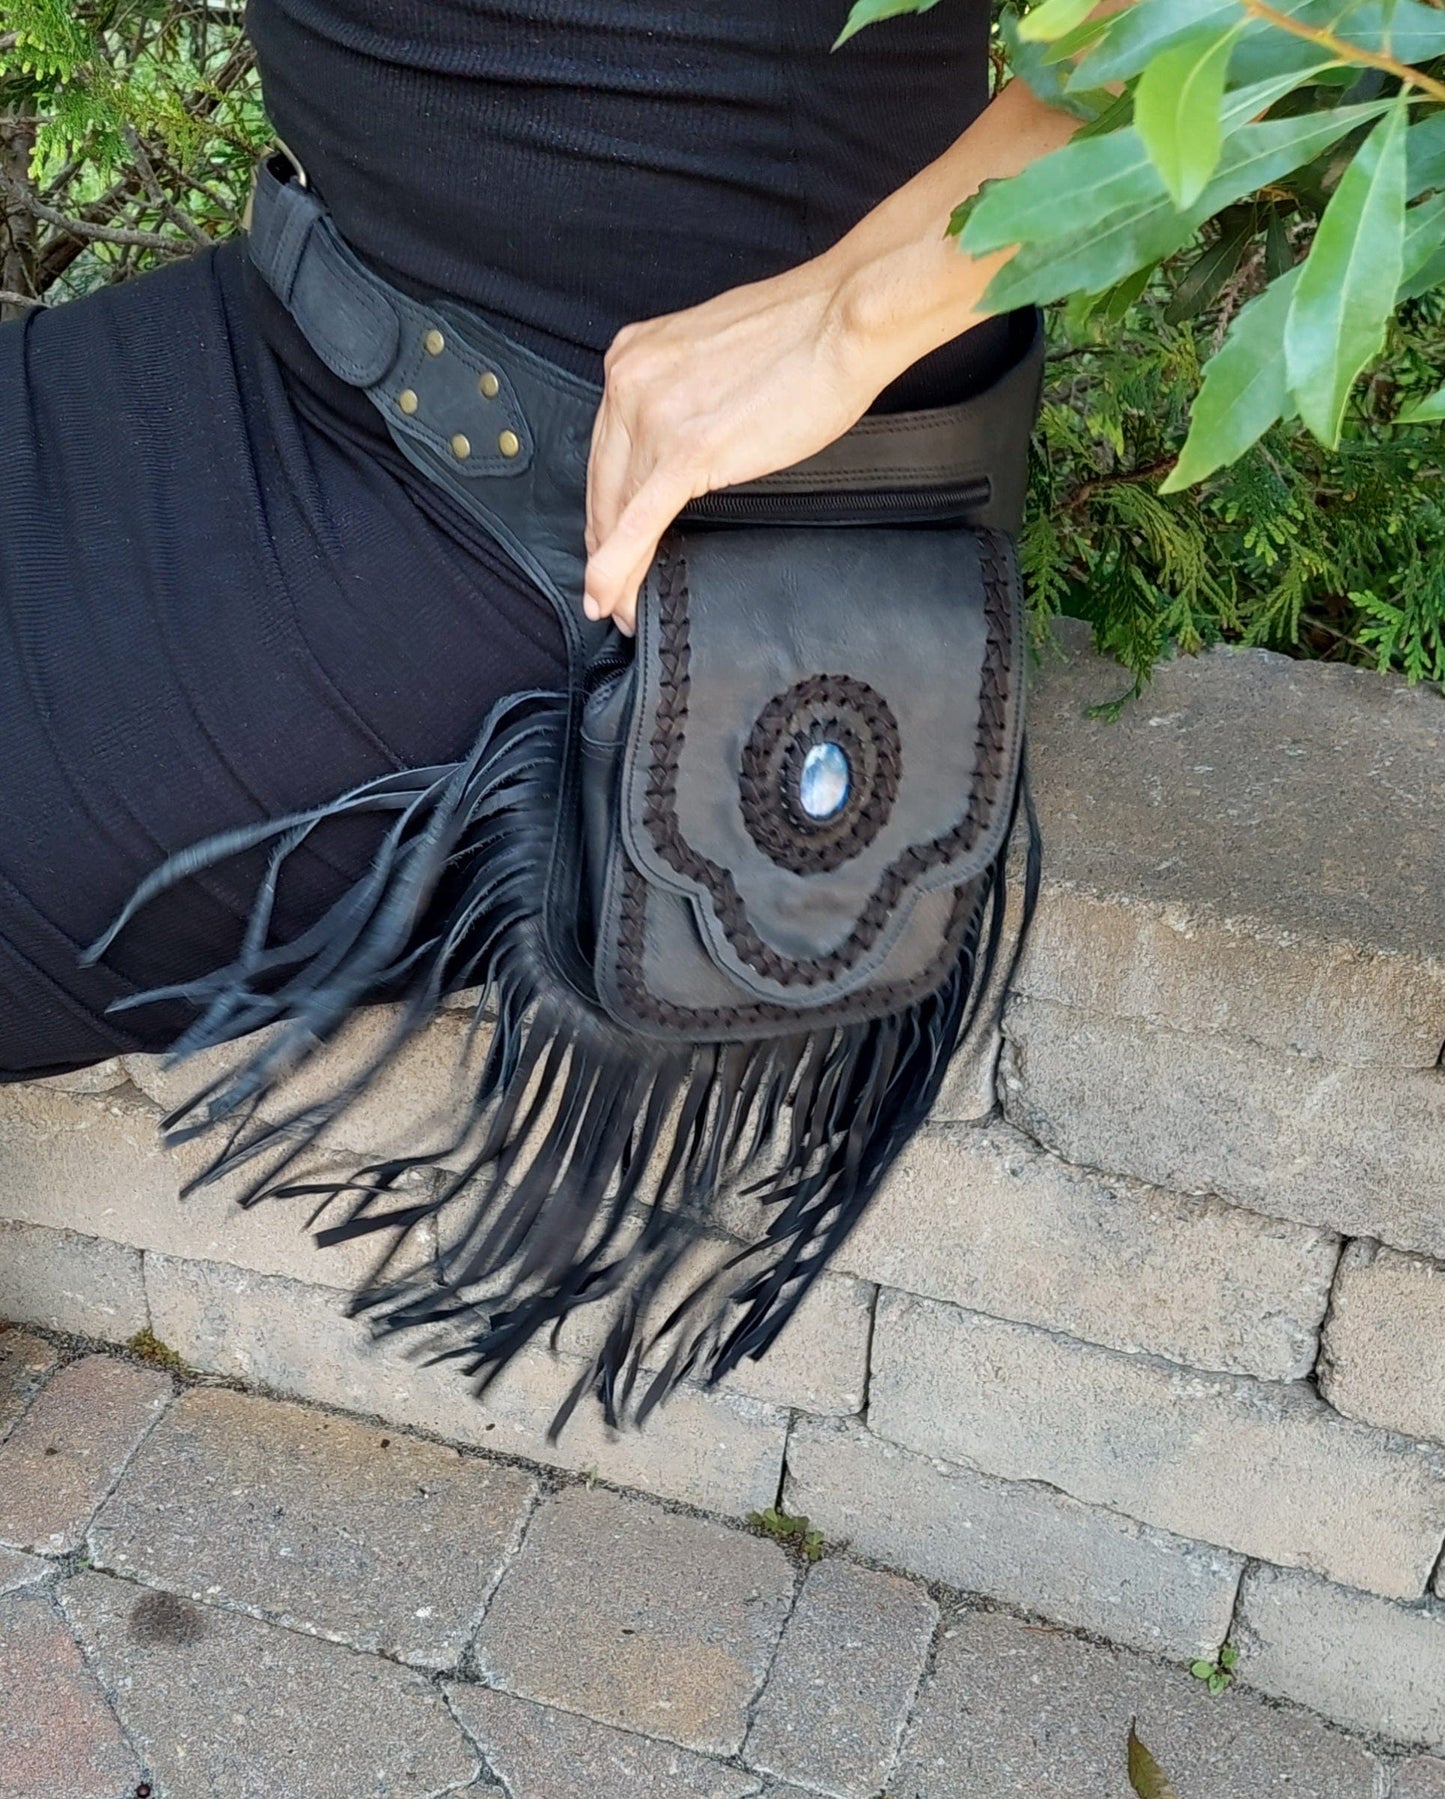 leather hip belt bag with fringe and stone detail | leatherncharm